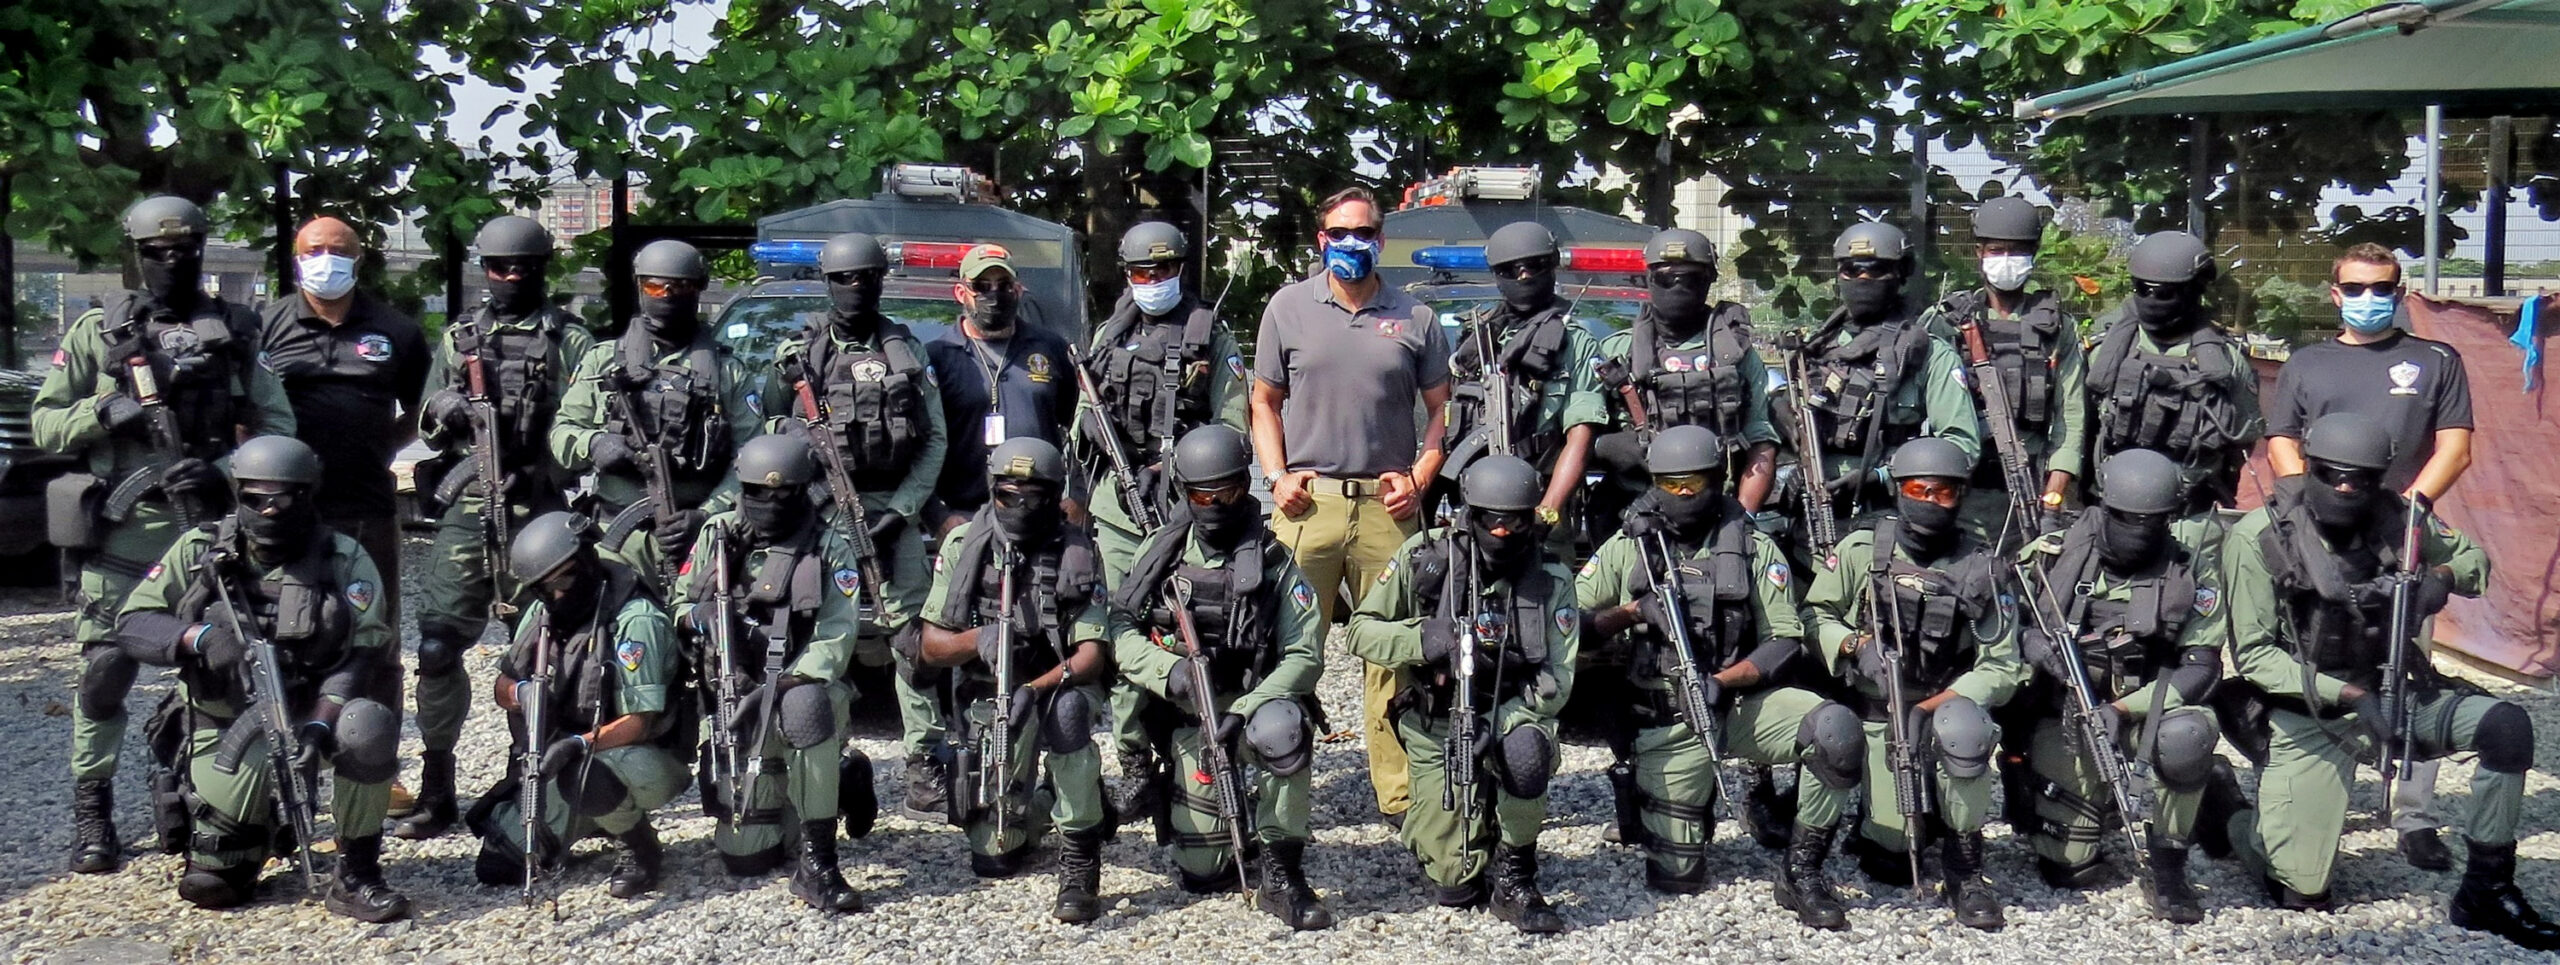 Police with the Lagos, Nigeria, SPEAR team pose alongside U.S. Diplomatic Security Service counterparts in November 2020. The police are part of a Special Program for Embassy Augmentation Response (SPEAR) team, assigned to protect U.S. diplomatic facilities and personnel. SPEAR teams are quick-response forces trained and funded by the Diplomatic Security Service’s Office of Antiterrorism Assistance (ATA). (Department of State photo)